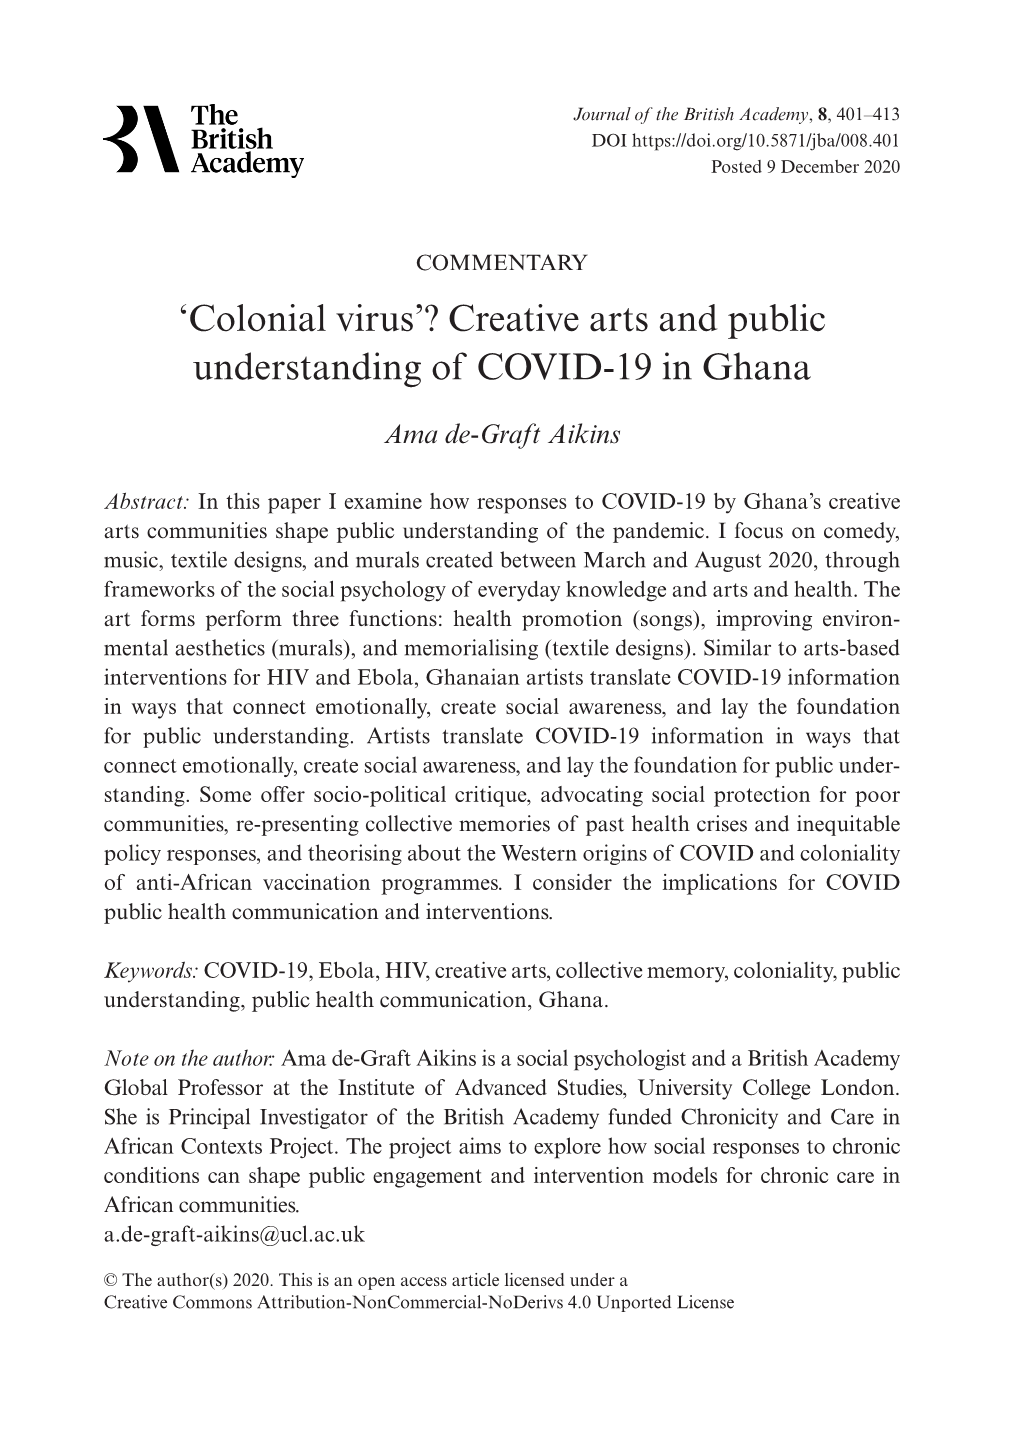 Creative Arts and Public Understanding of COVID-19 in Ghana